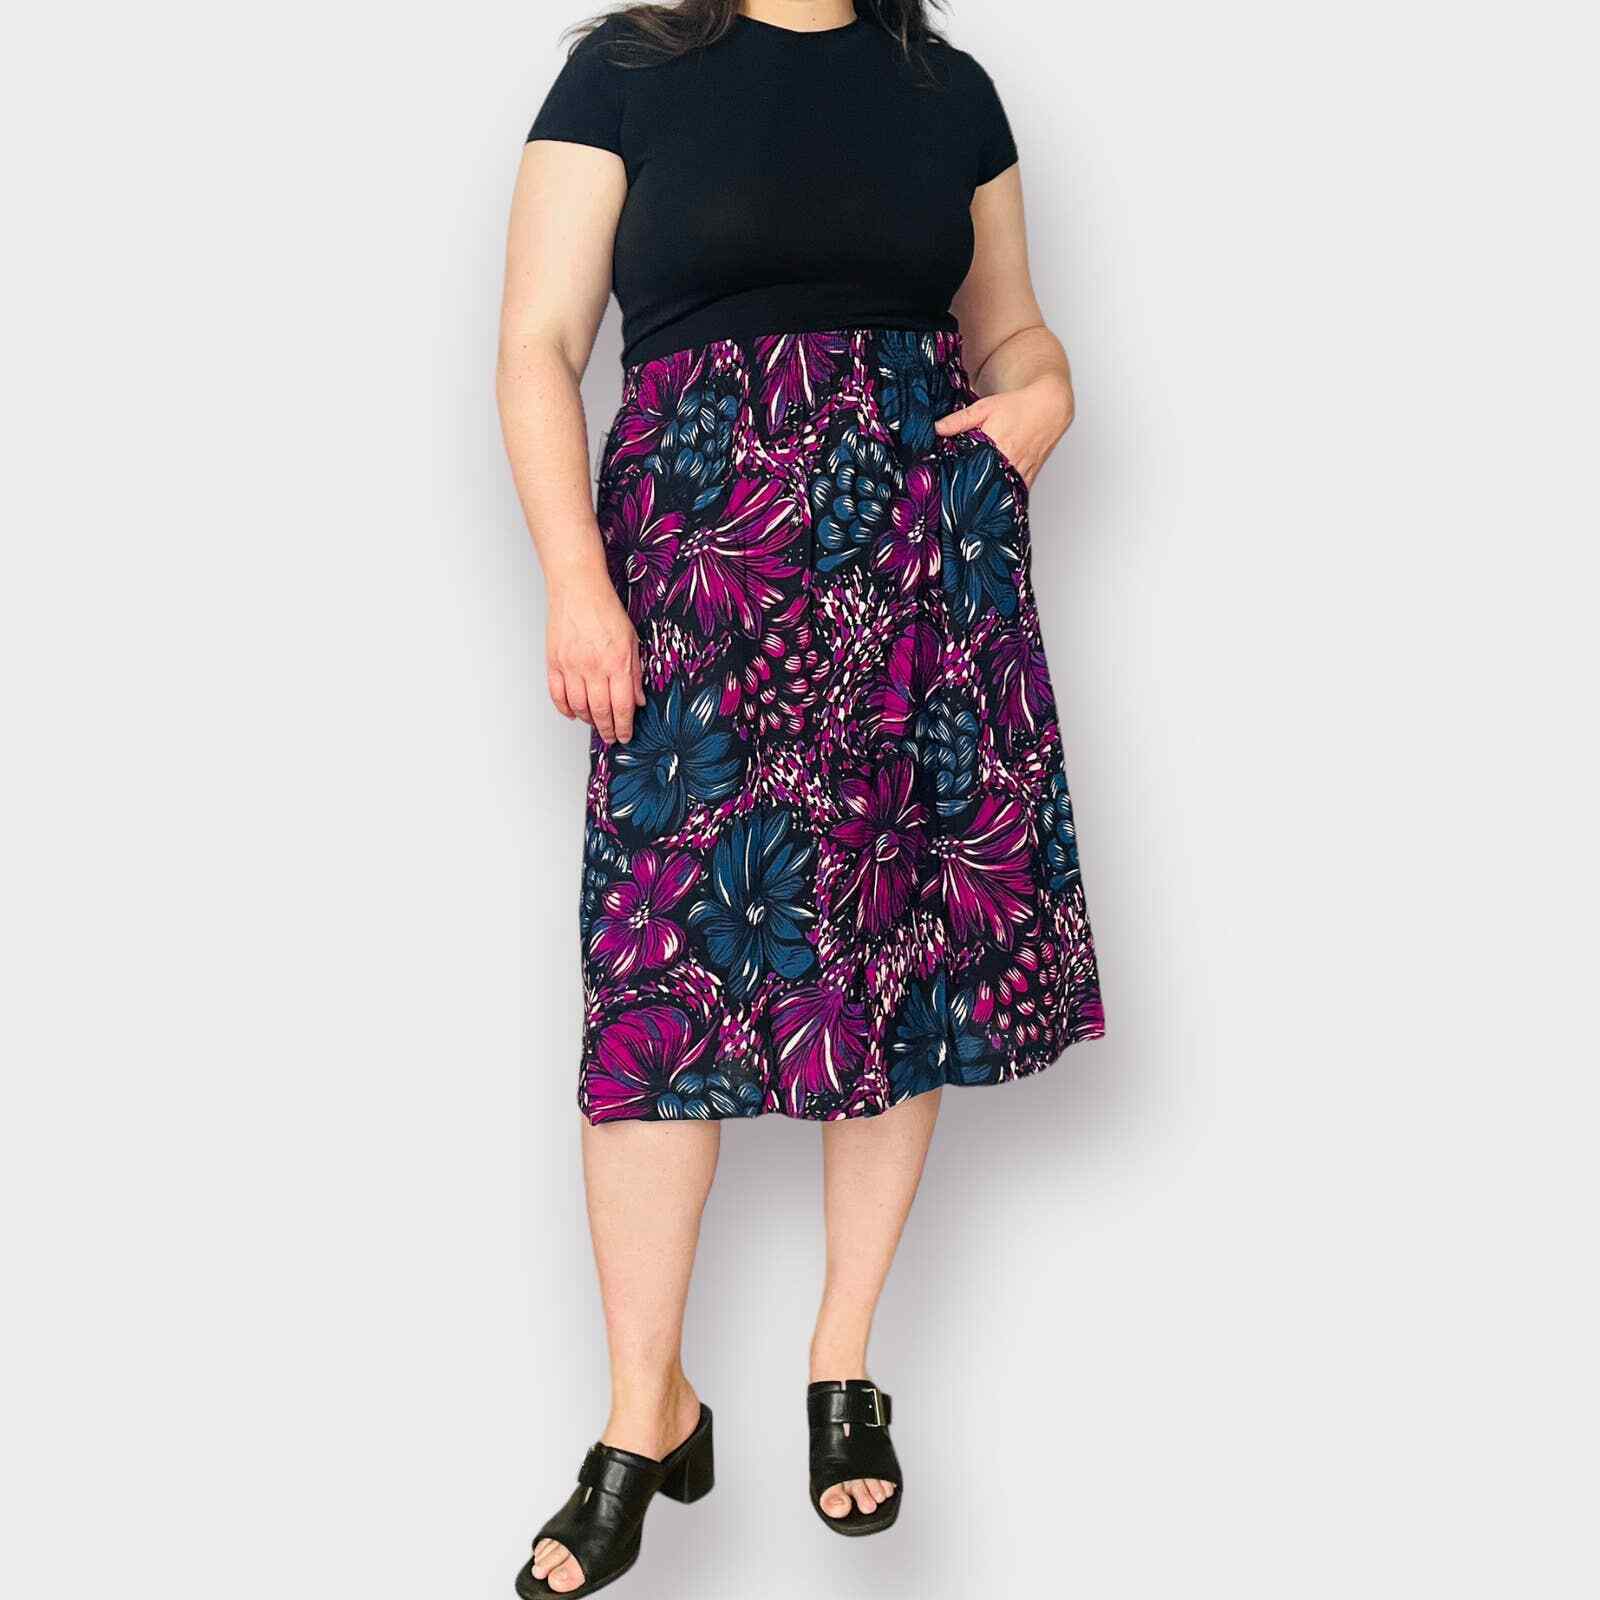 80s Fuchsia and Blue Floral Skirt - image 1